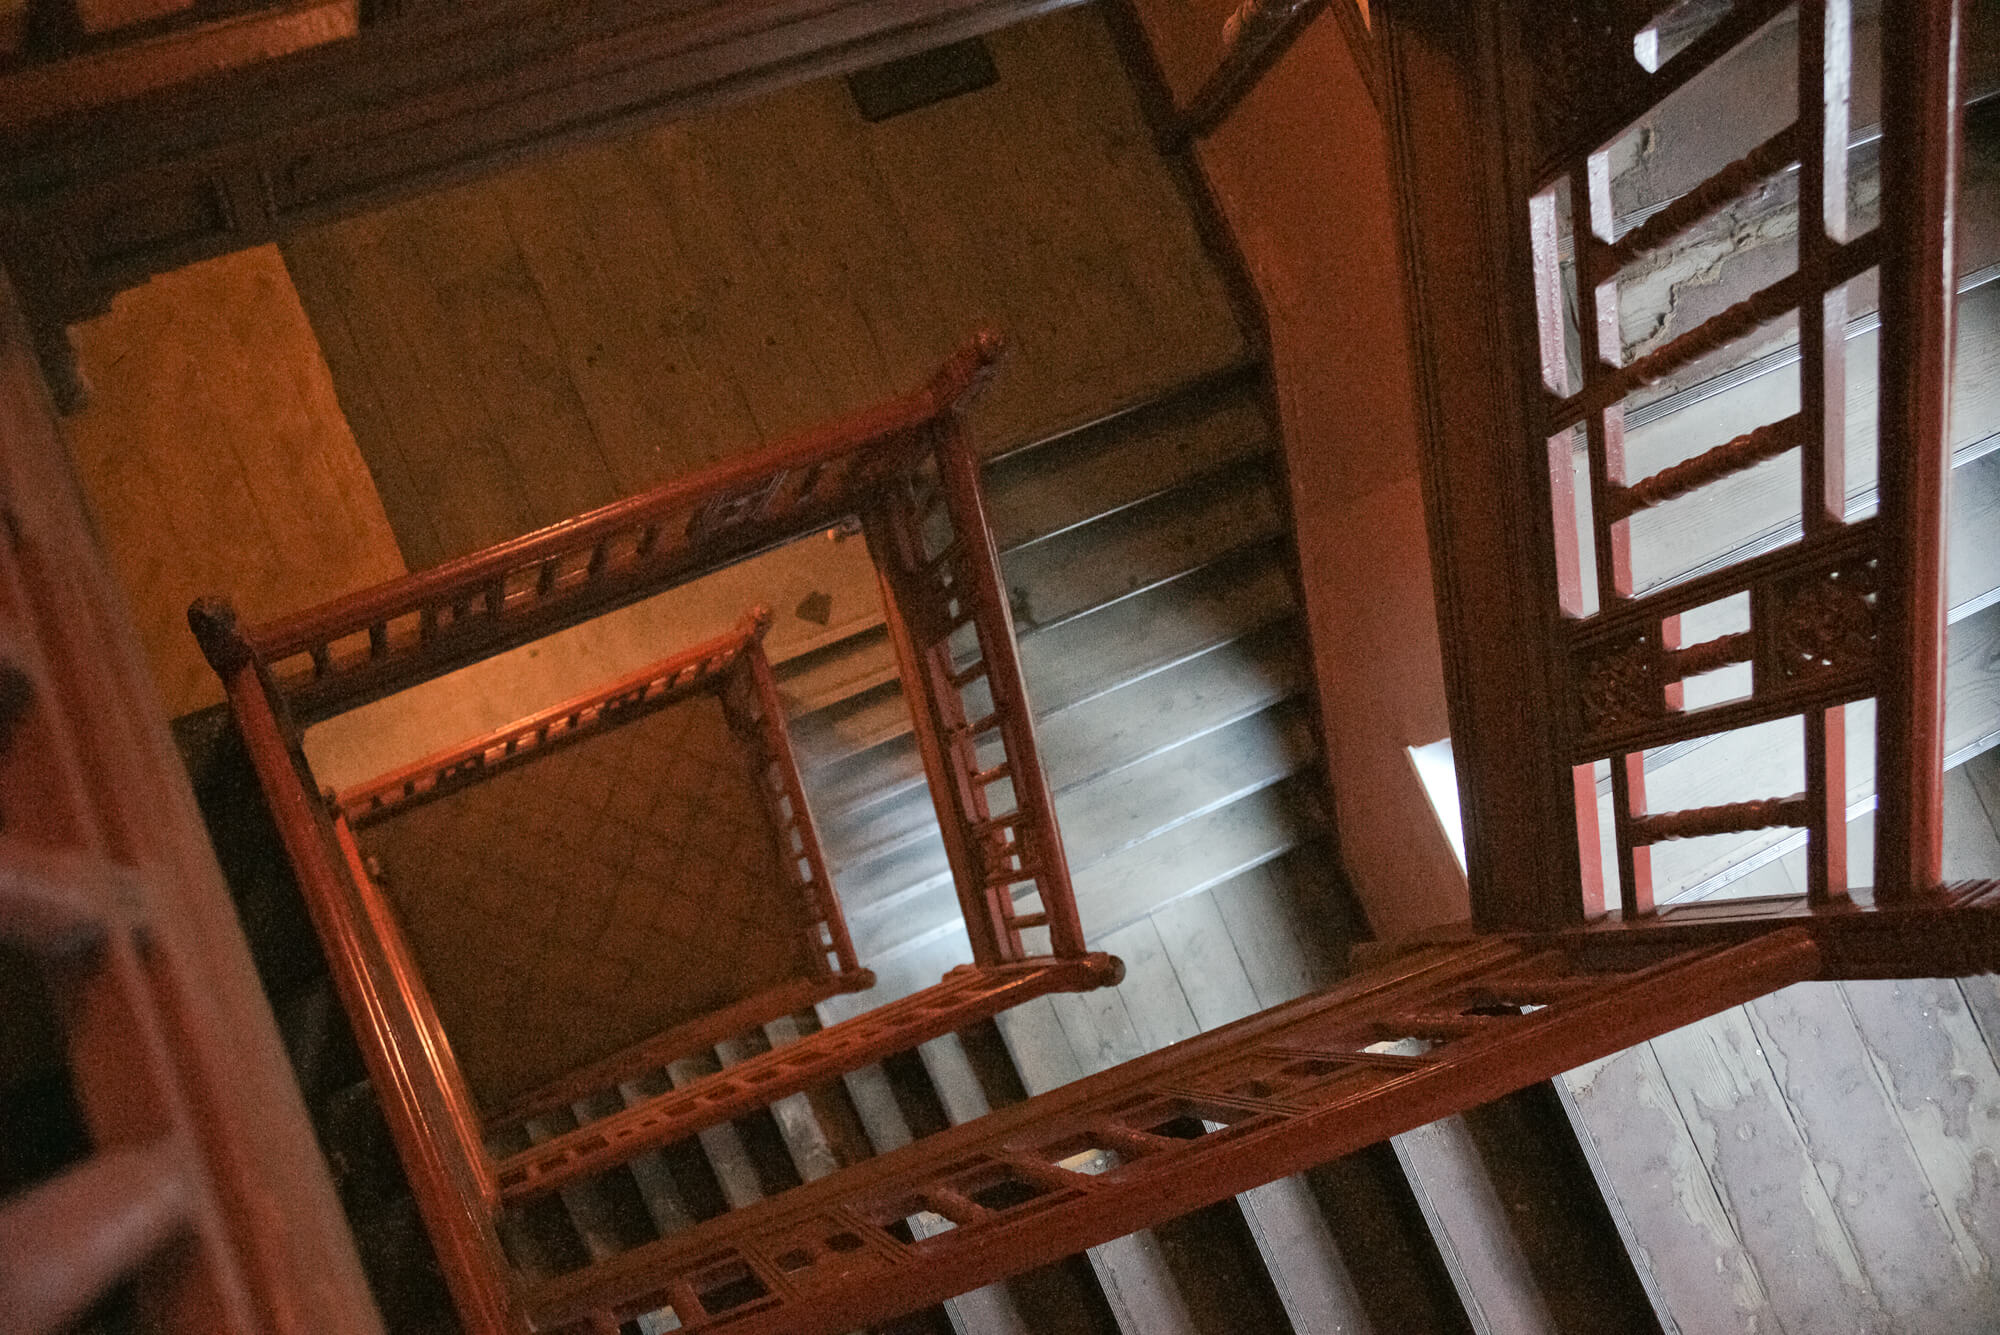 6. Staircase 1